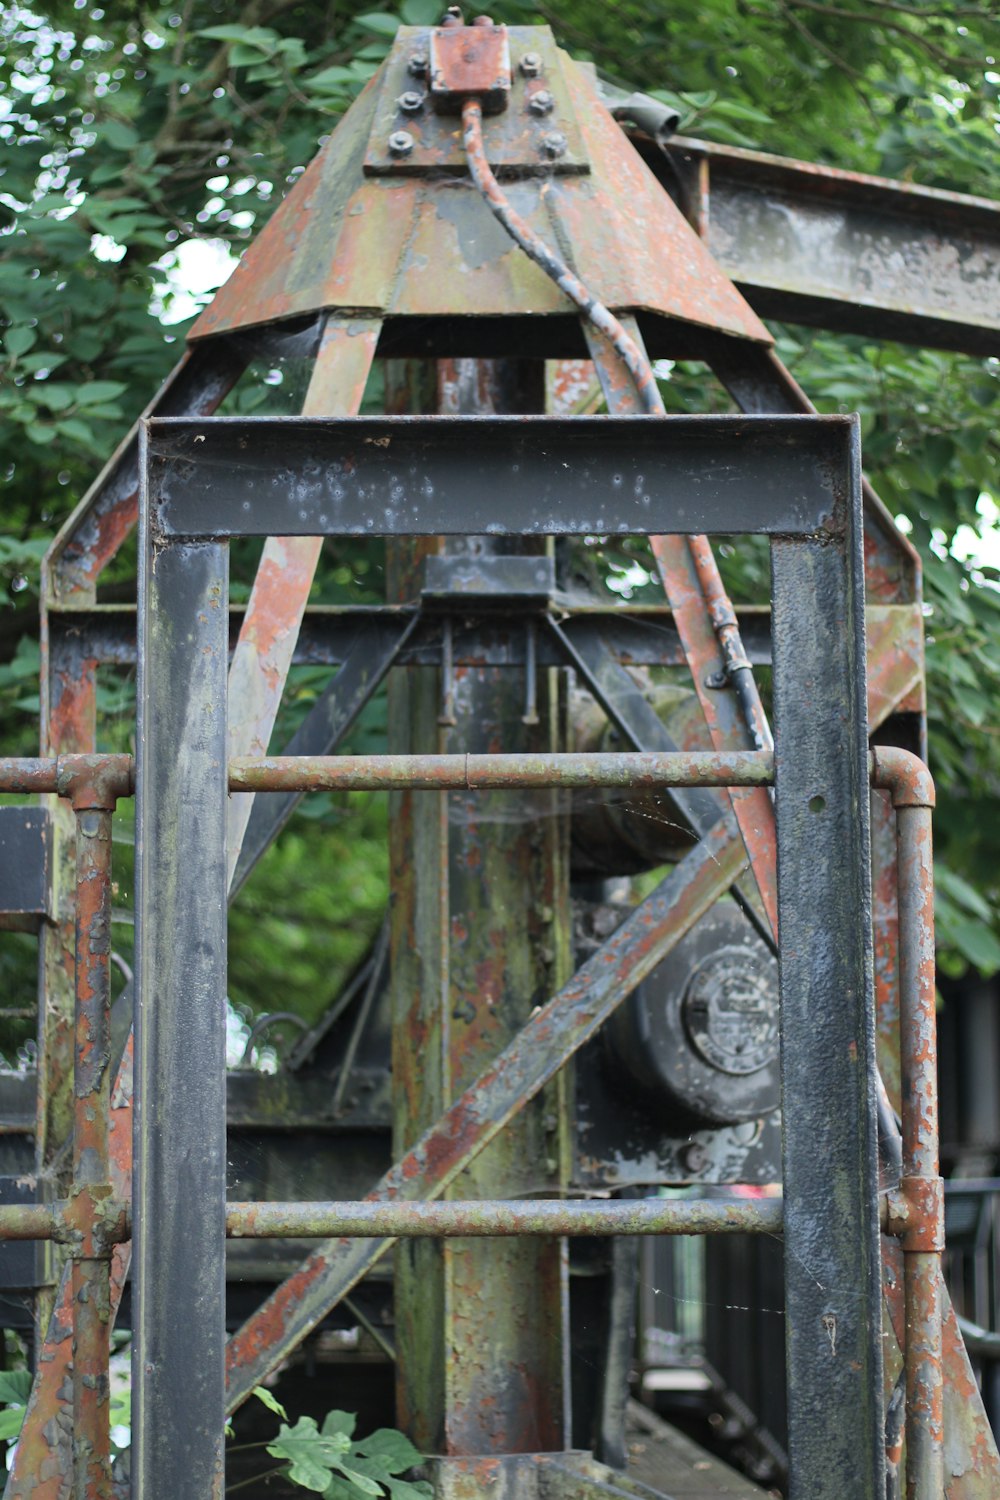 a metal structure with a metal frame